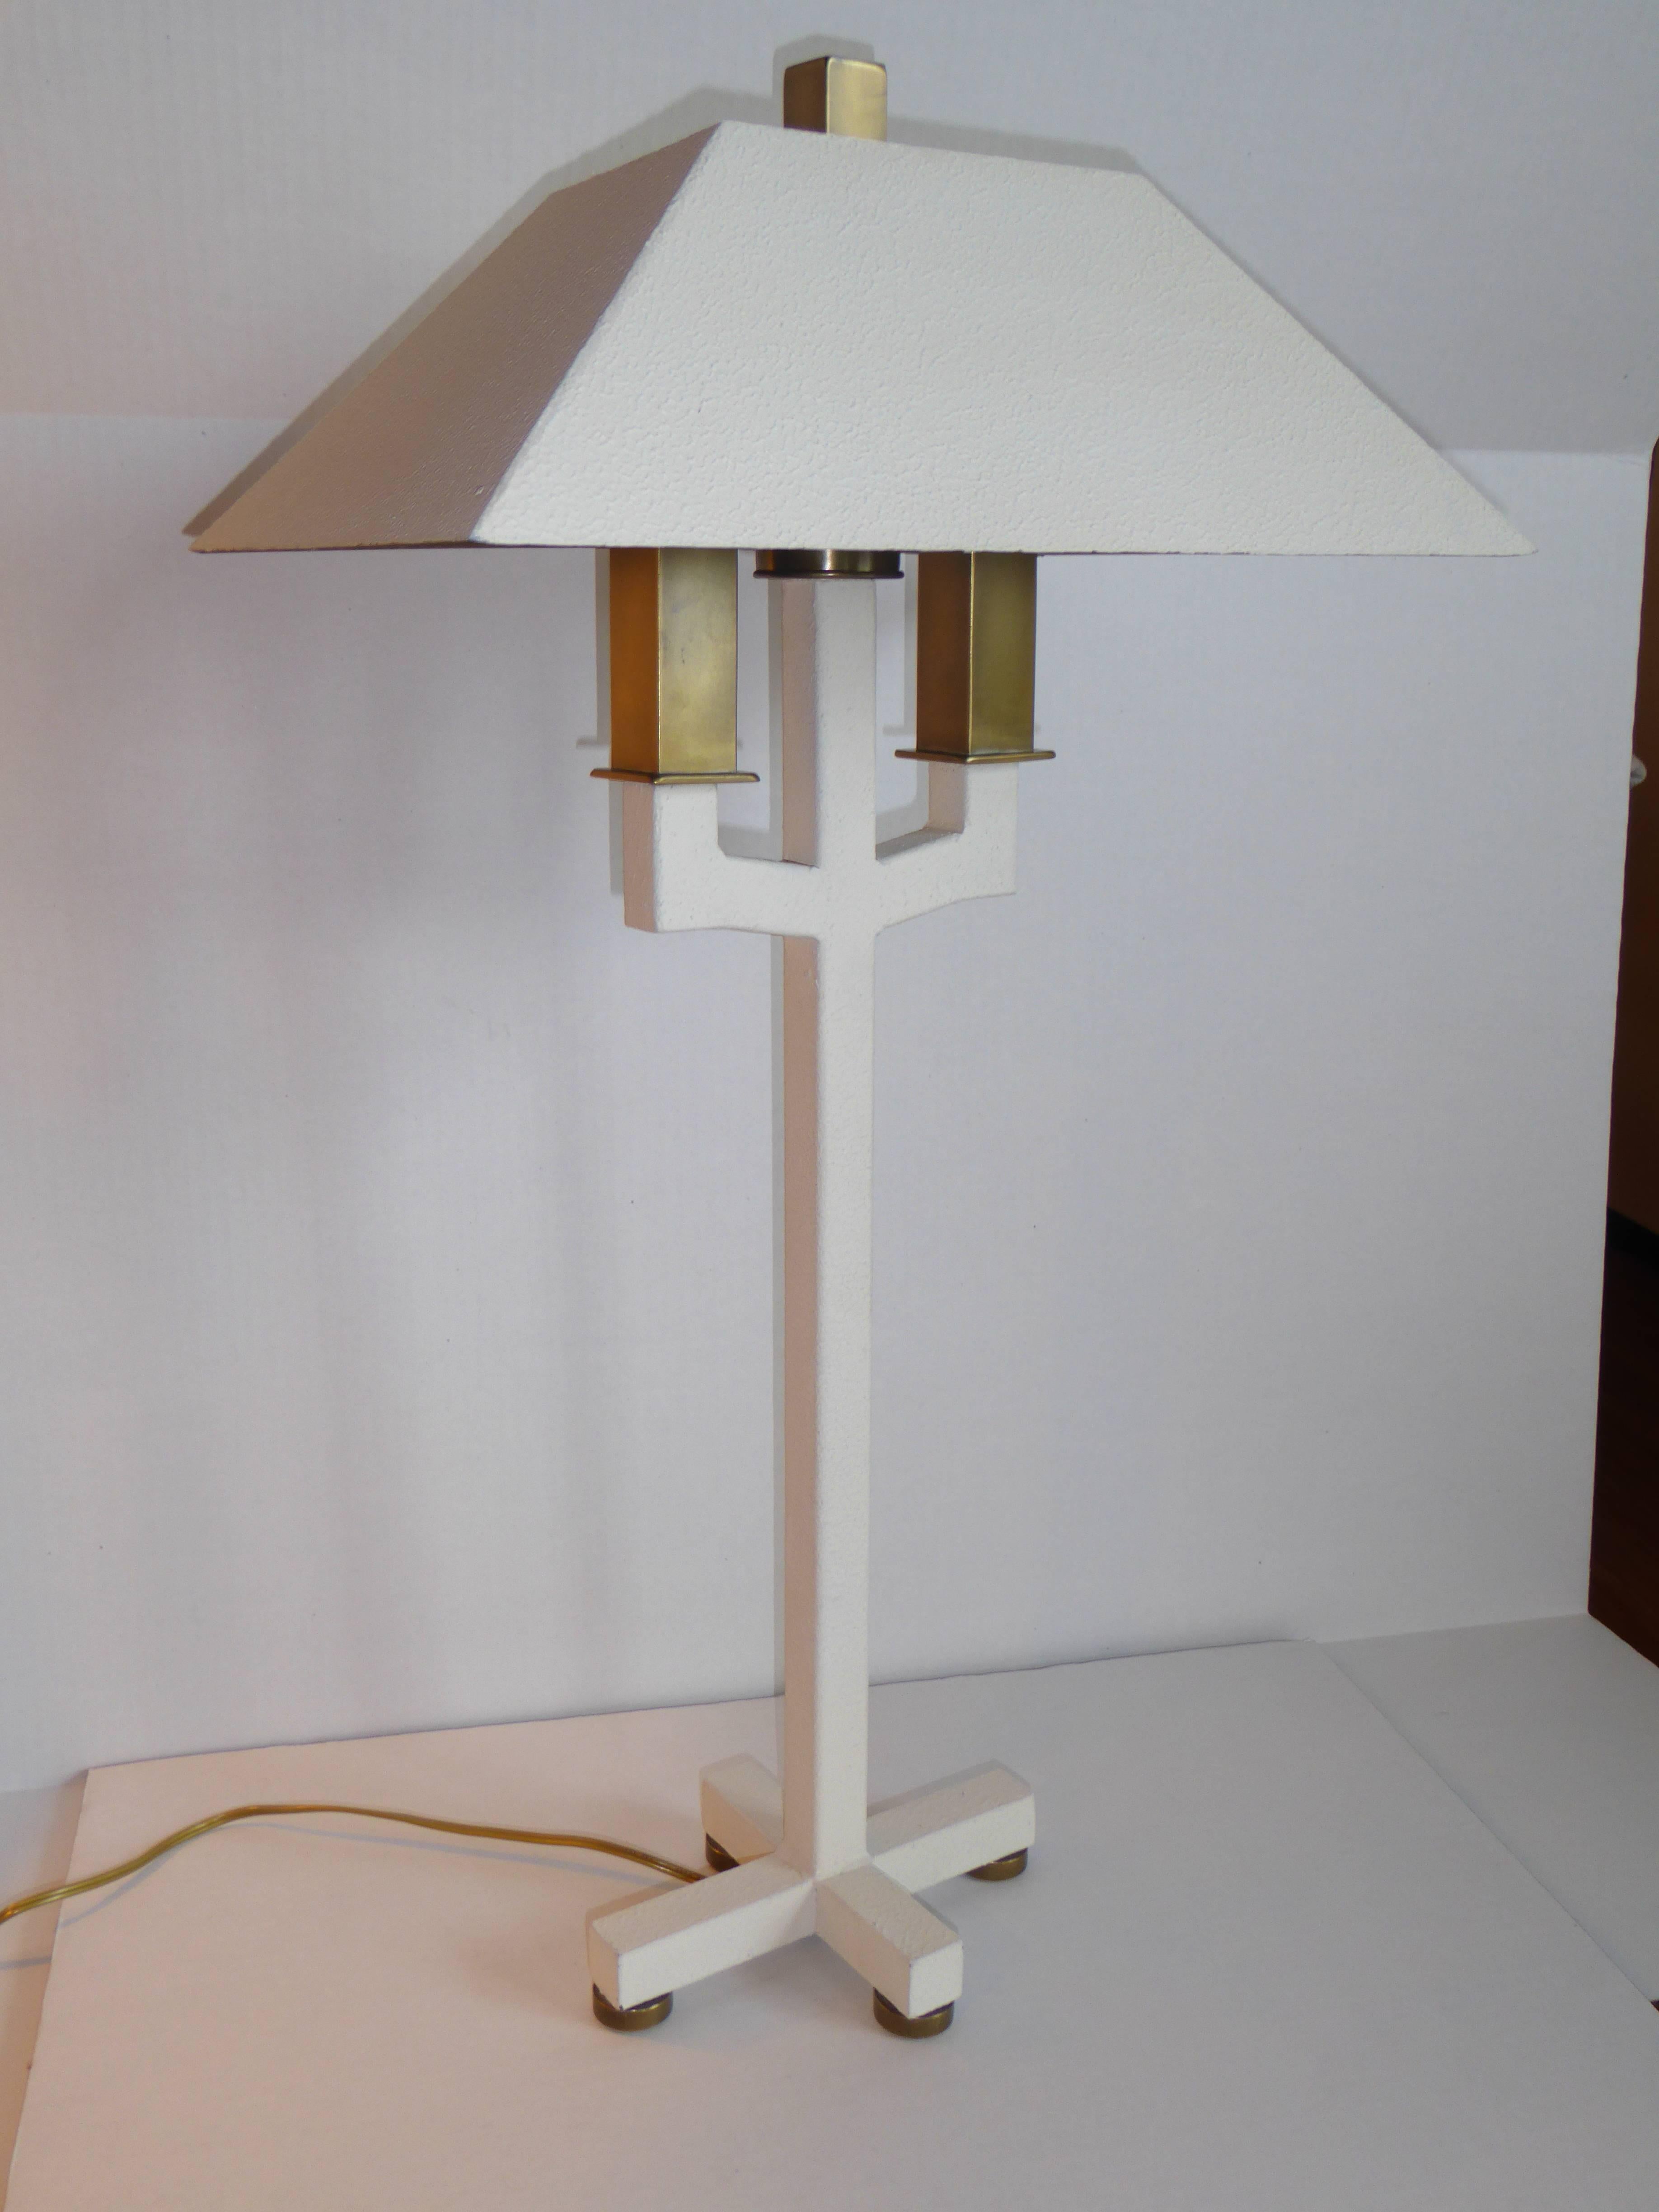 REDUCED FROM $650....Lucious antiqued brass and white textured metal Postmodern Bouillote table lamp, exceptional lighting created by Hart Associates. Featuring all metal construction with antiqued brass candles, works, finial and button feet. The